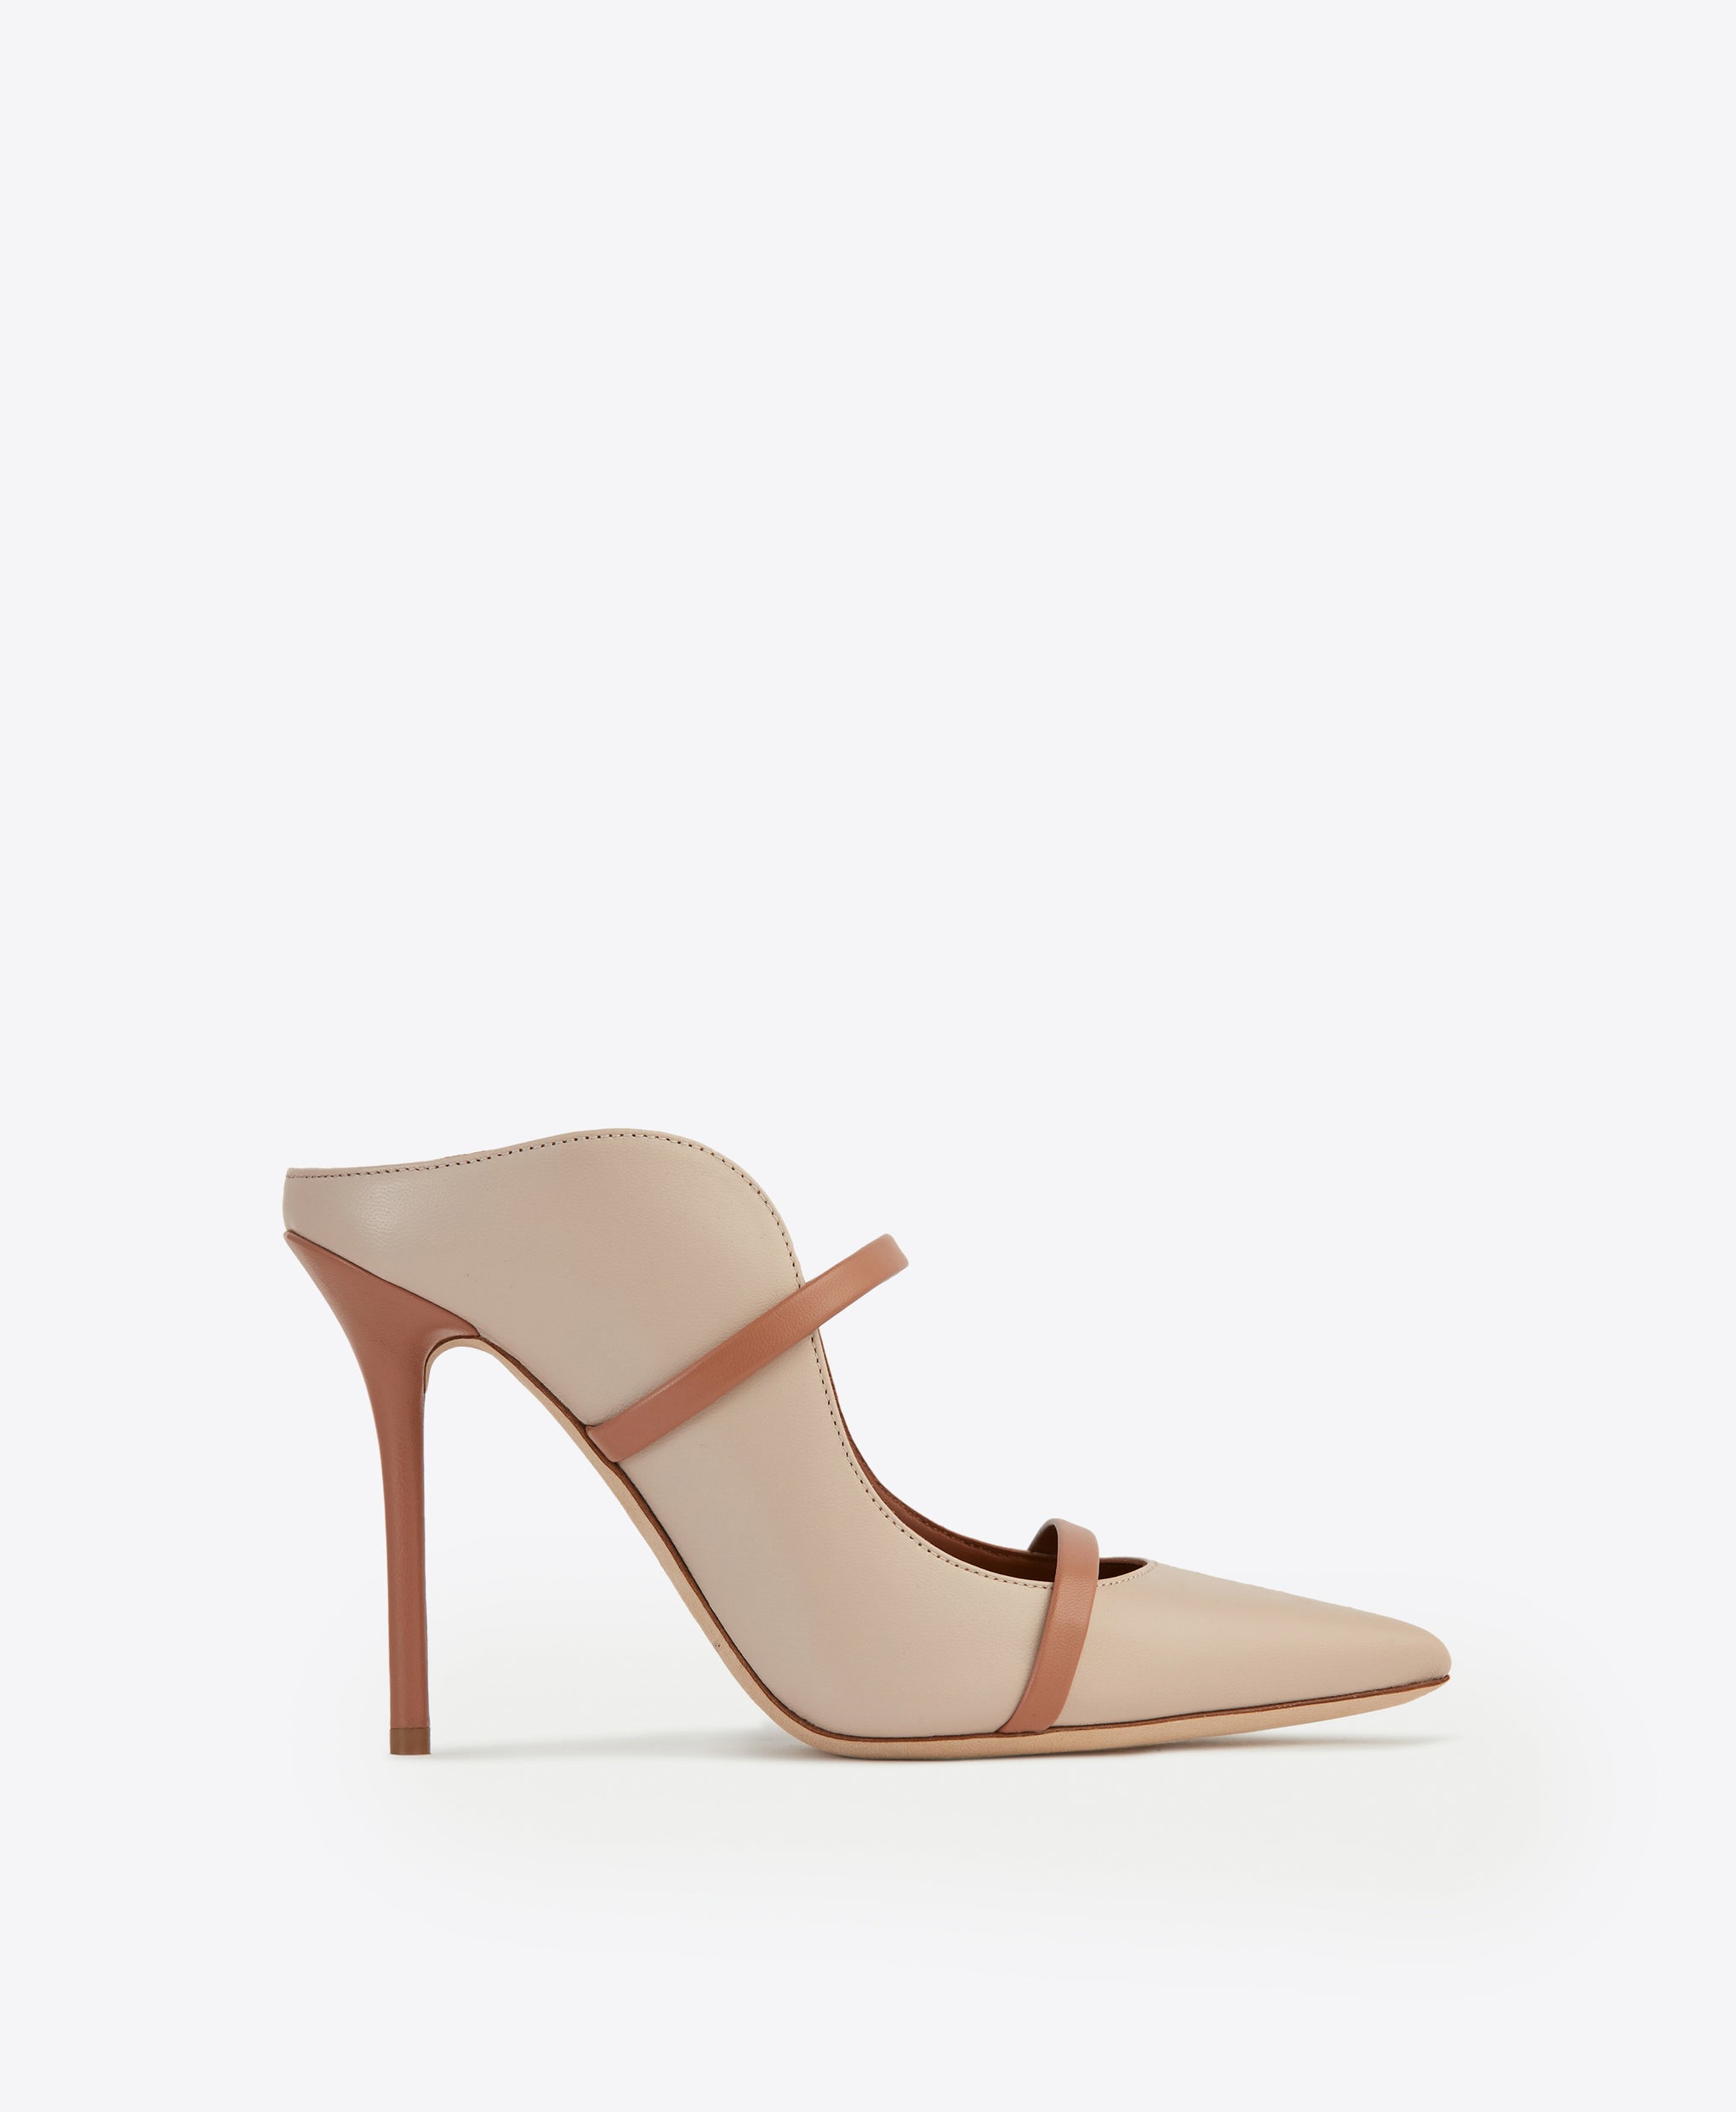 Women's Ice Nude Leather High Heel Mules Malone Souliers